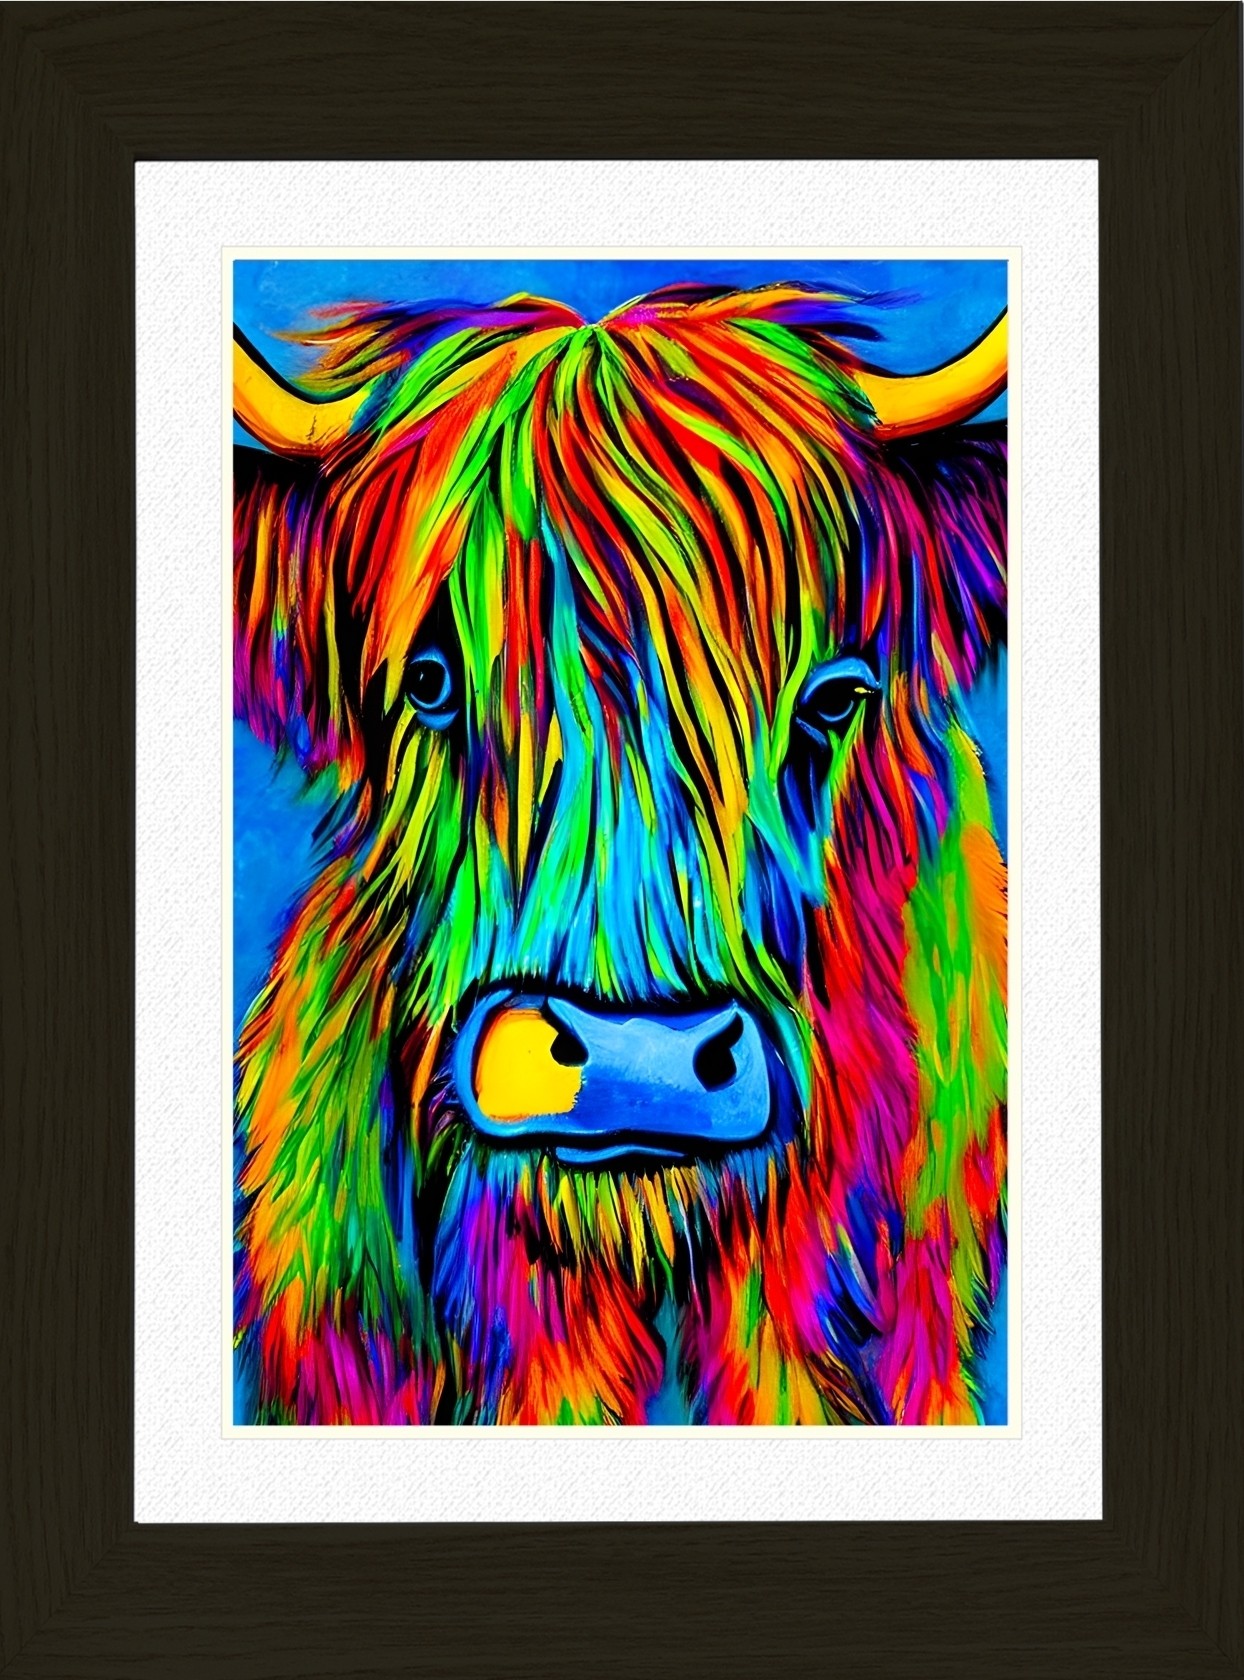 Highland Cow Animal Picture Framed Colourful Abstract Art (25cm x 20cm Black Frame)